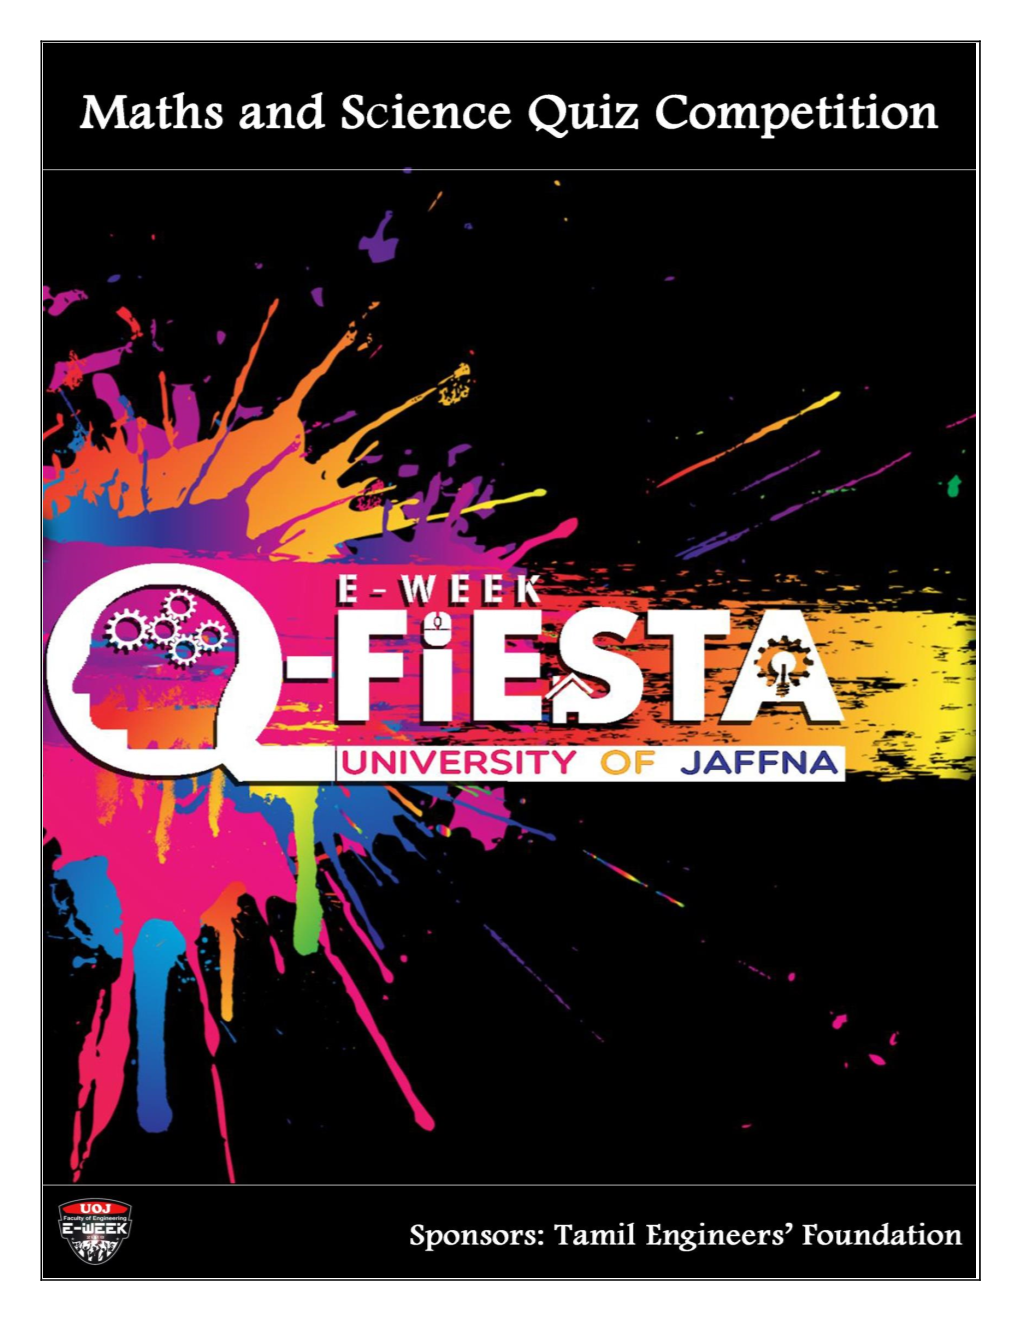 Download the Oral Quiz Competition Named Q-Fiesta